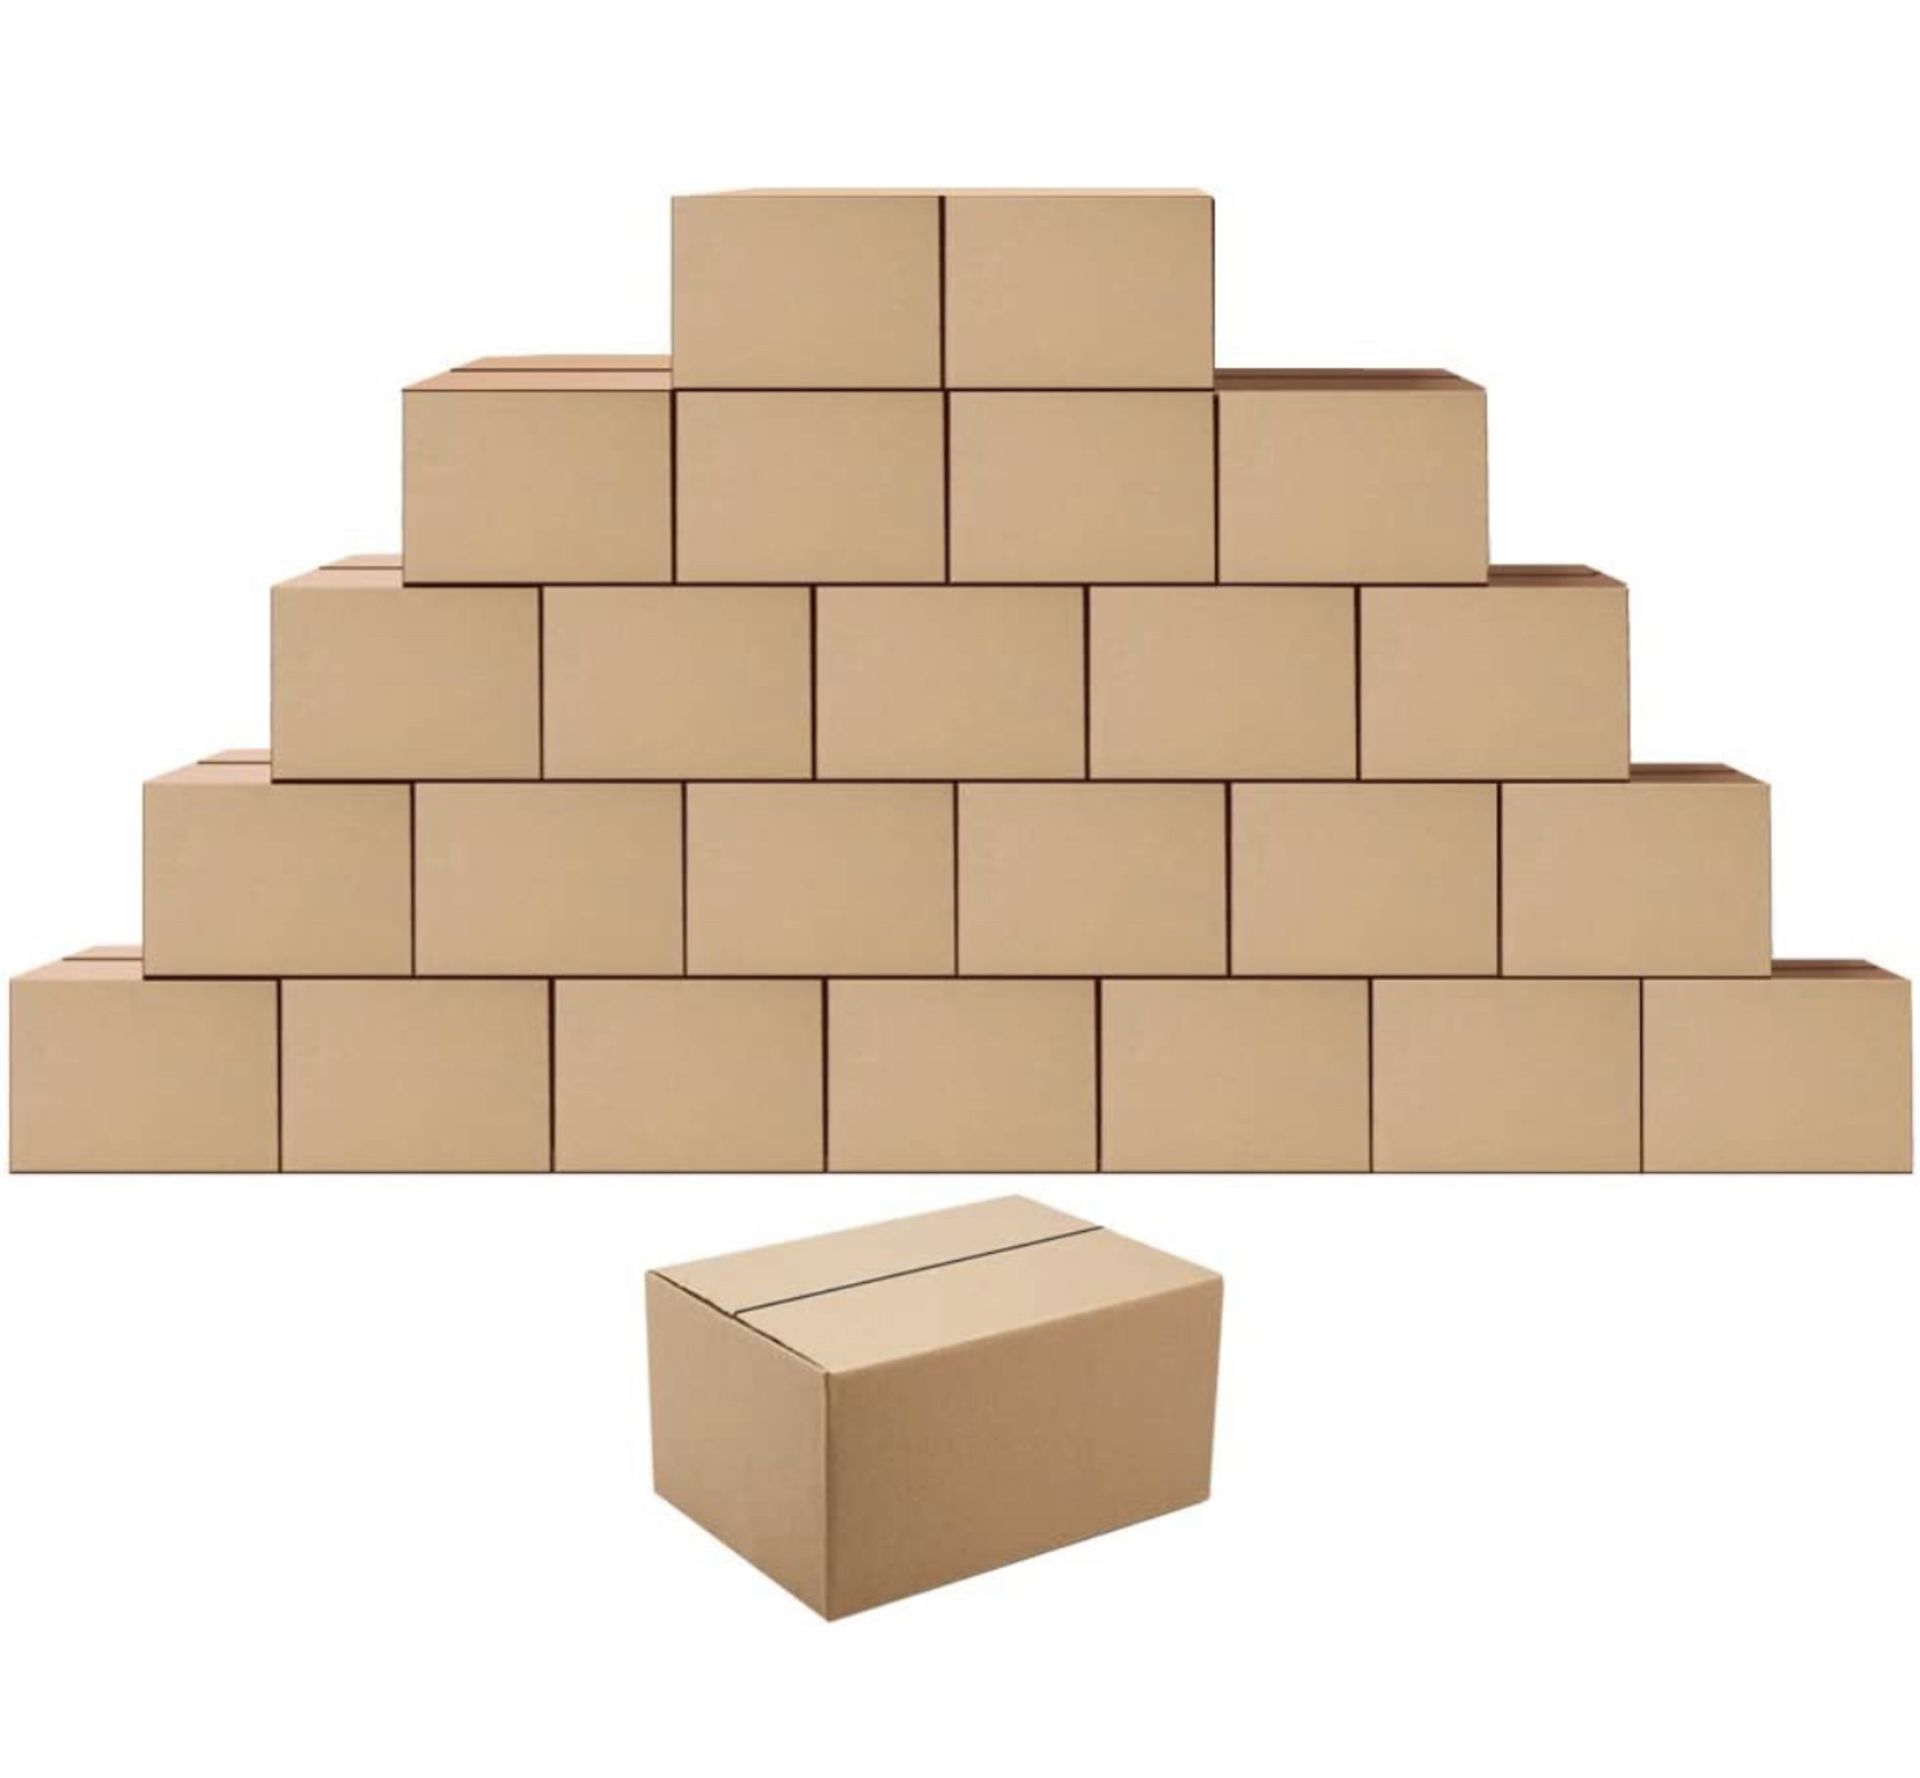 Eono Small Packing Shipping Mailing Boxes, 25 Pack 20 x 15 x 10 cm